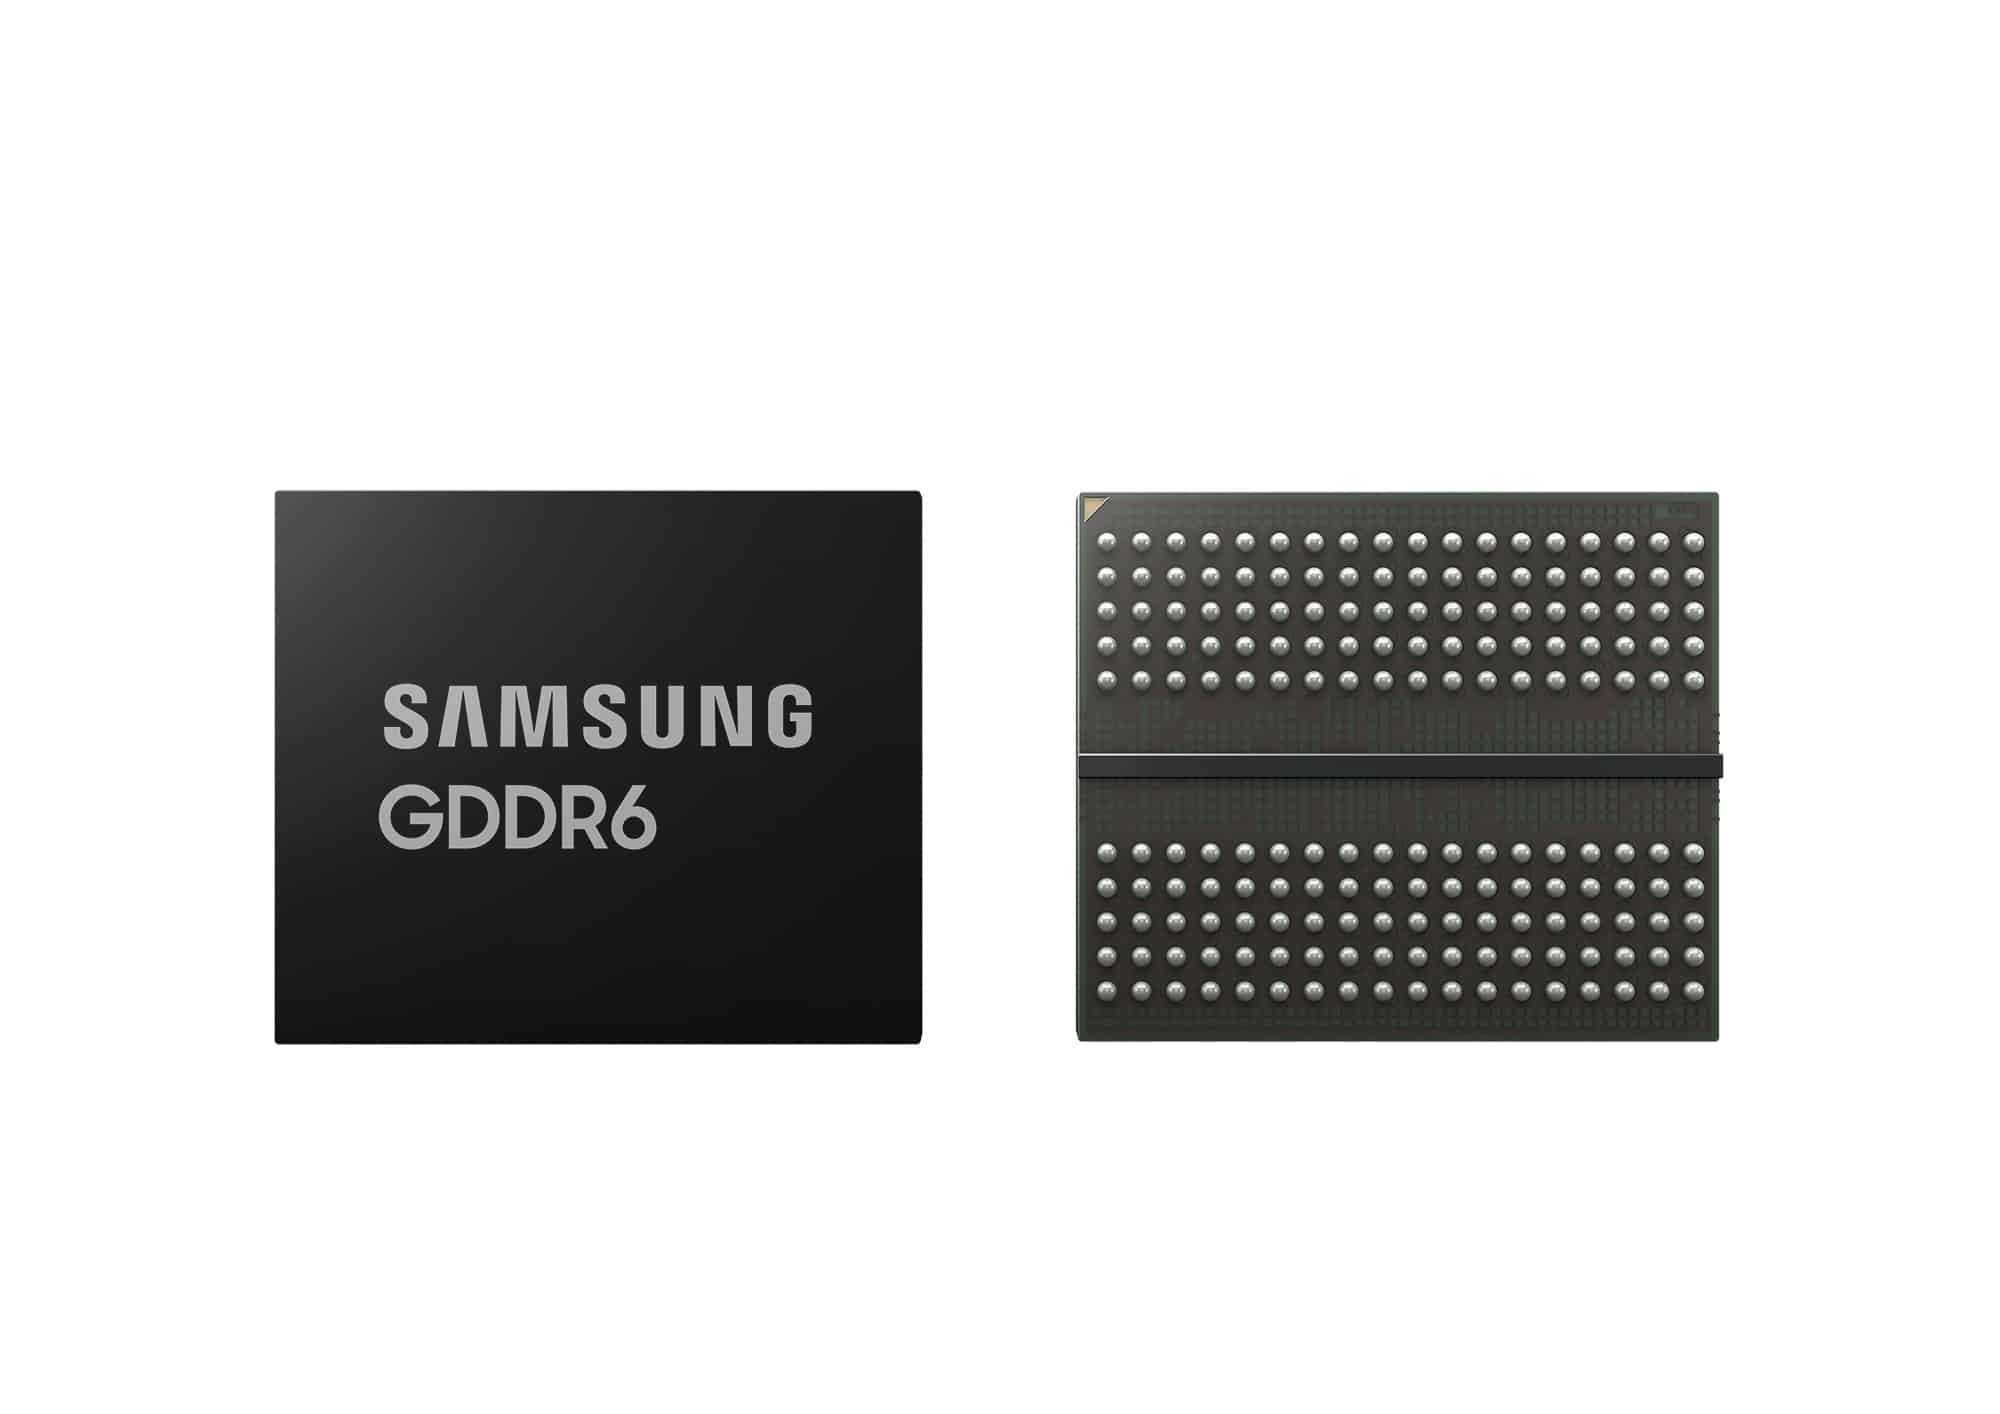 Samsung with 24 Gb/s fast GDDR6 memory for upcoming GPUs